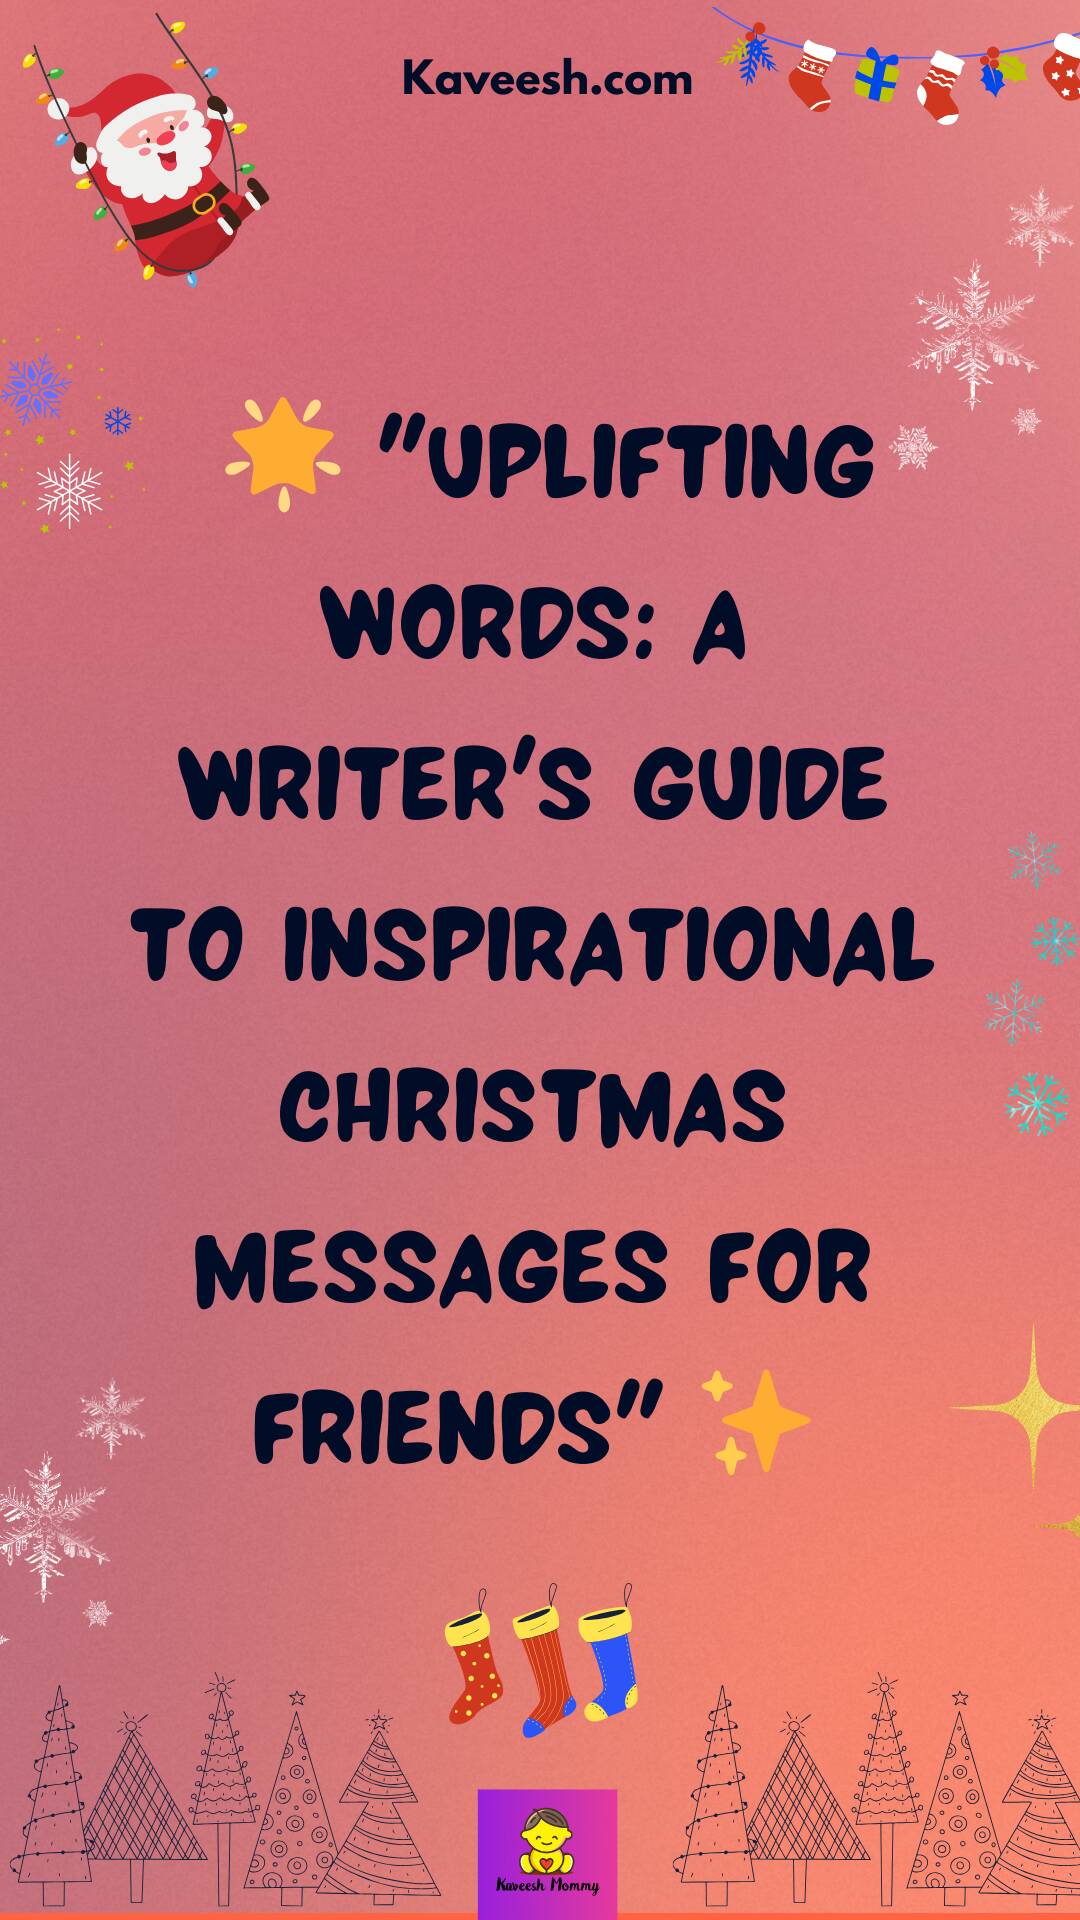 List of inspirational Christmas messages for friends